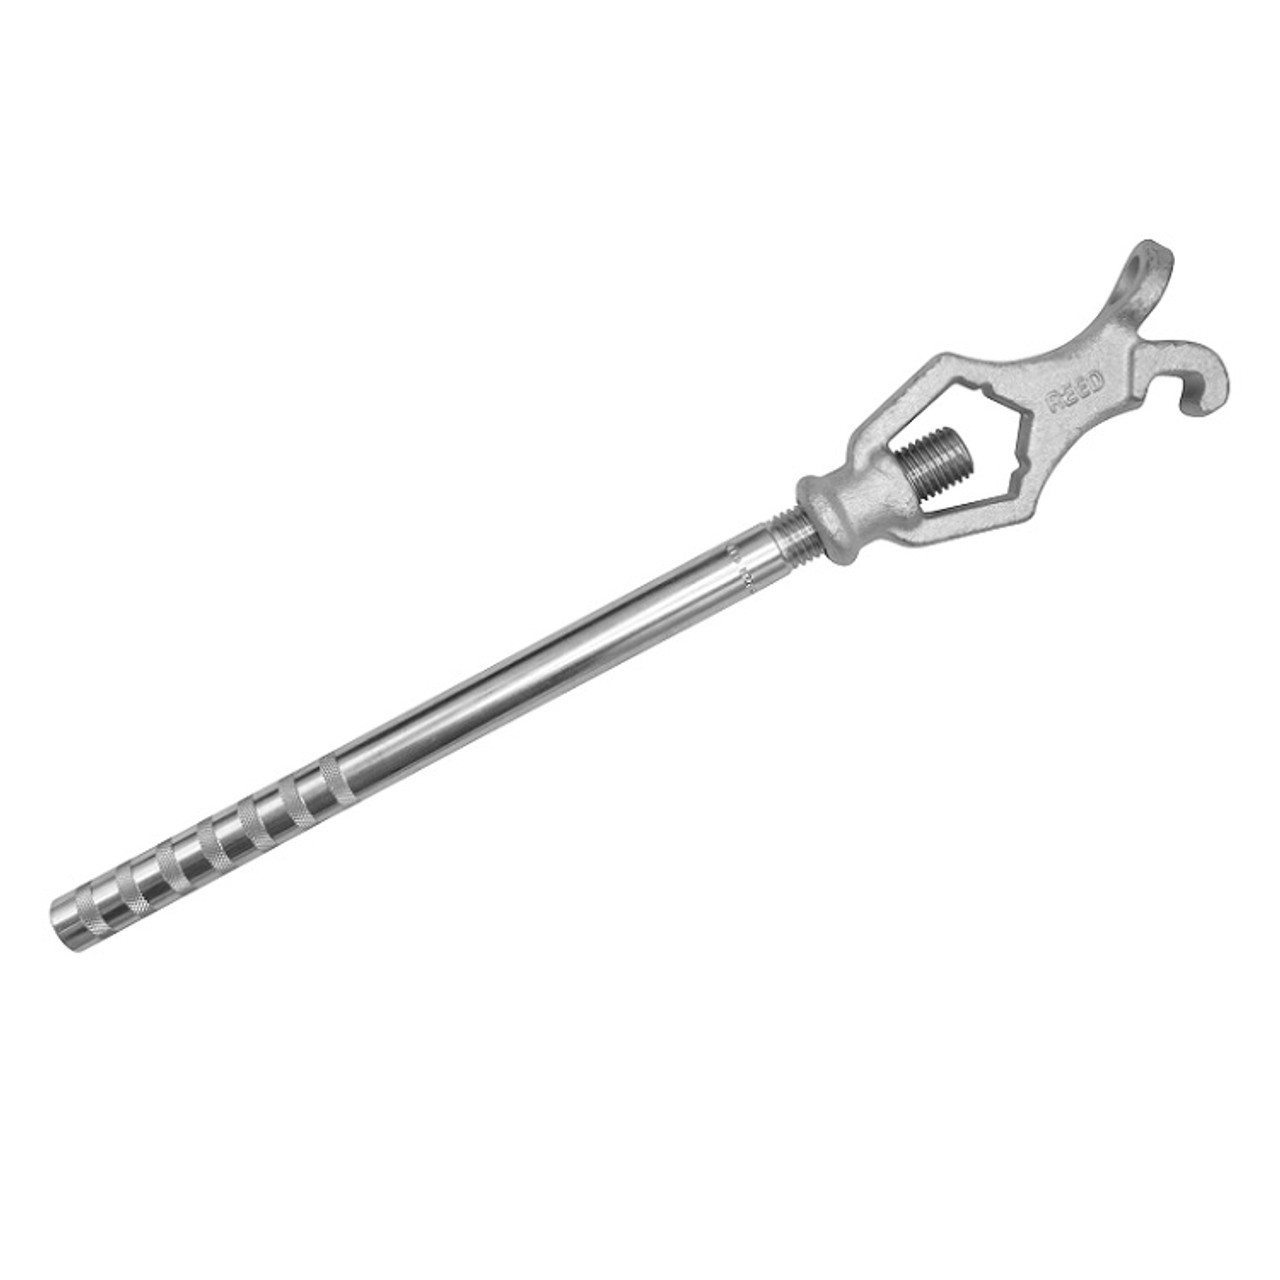 SW18A48, Strap Wrenches